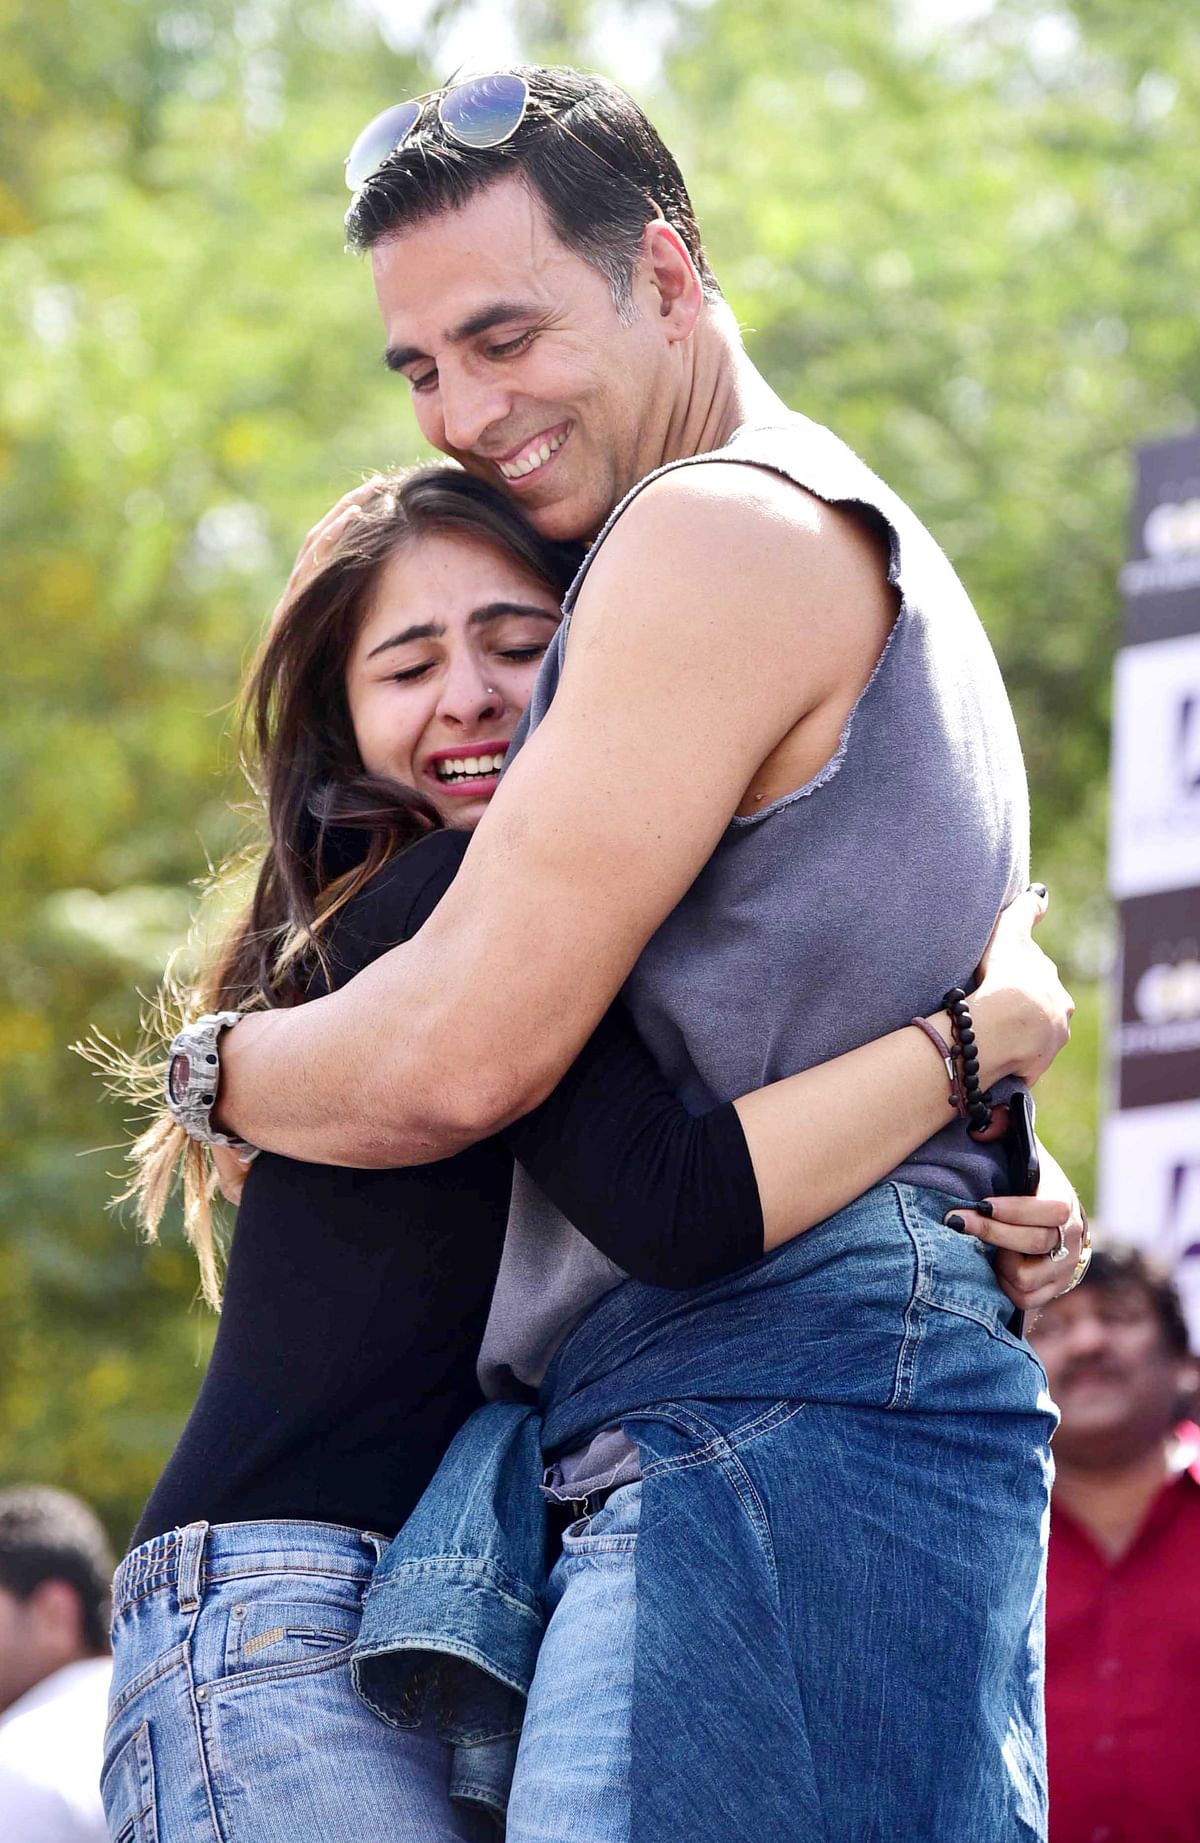 Watch Akshay Kumar get tackled by a fan here.